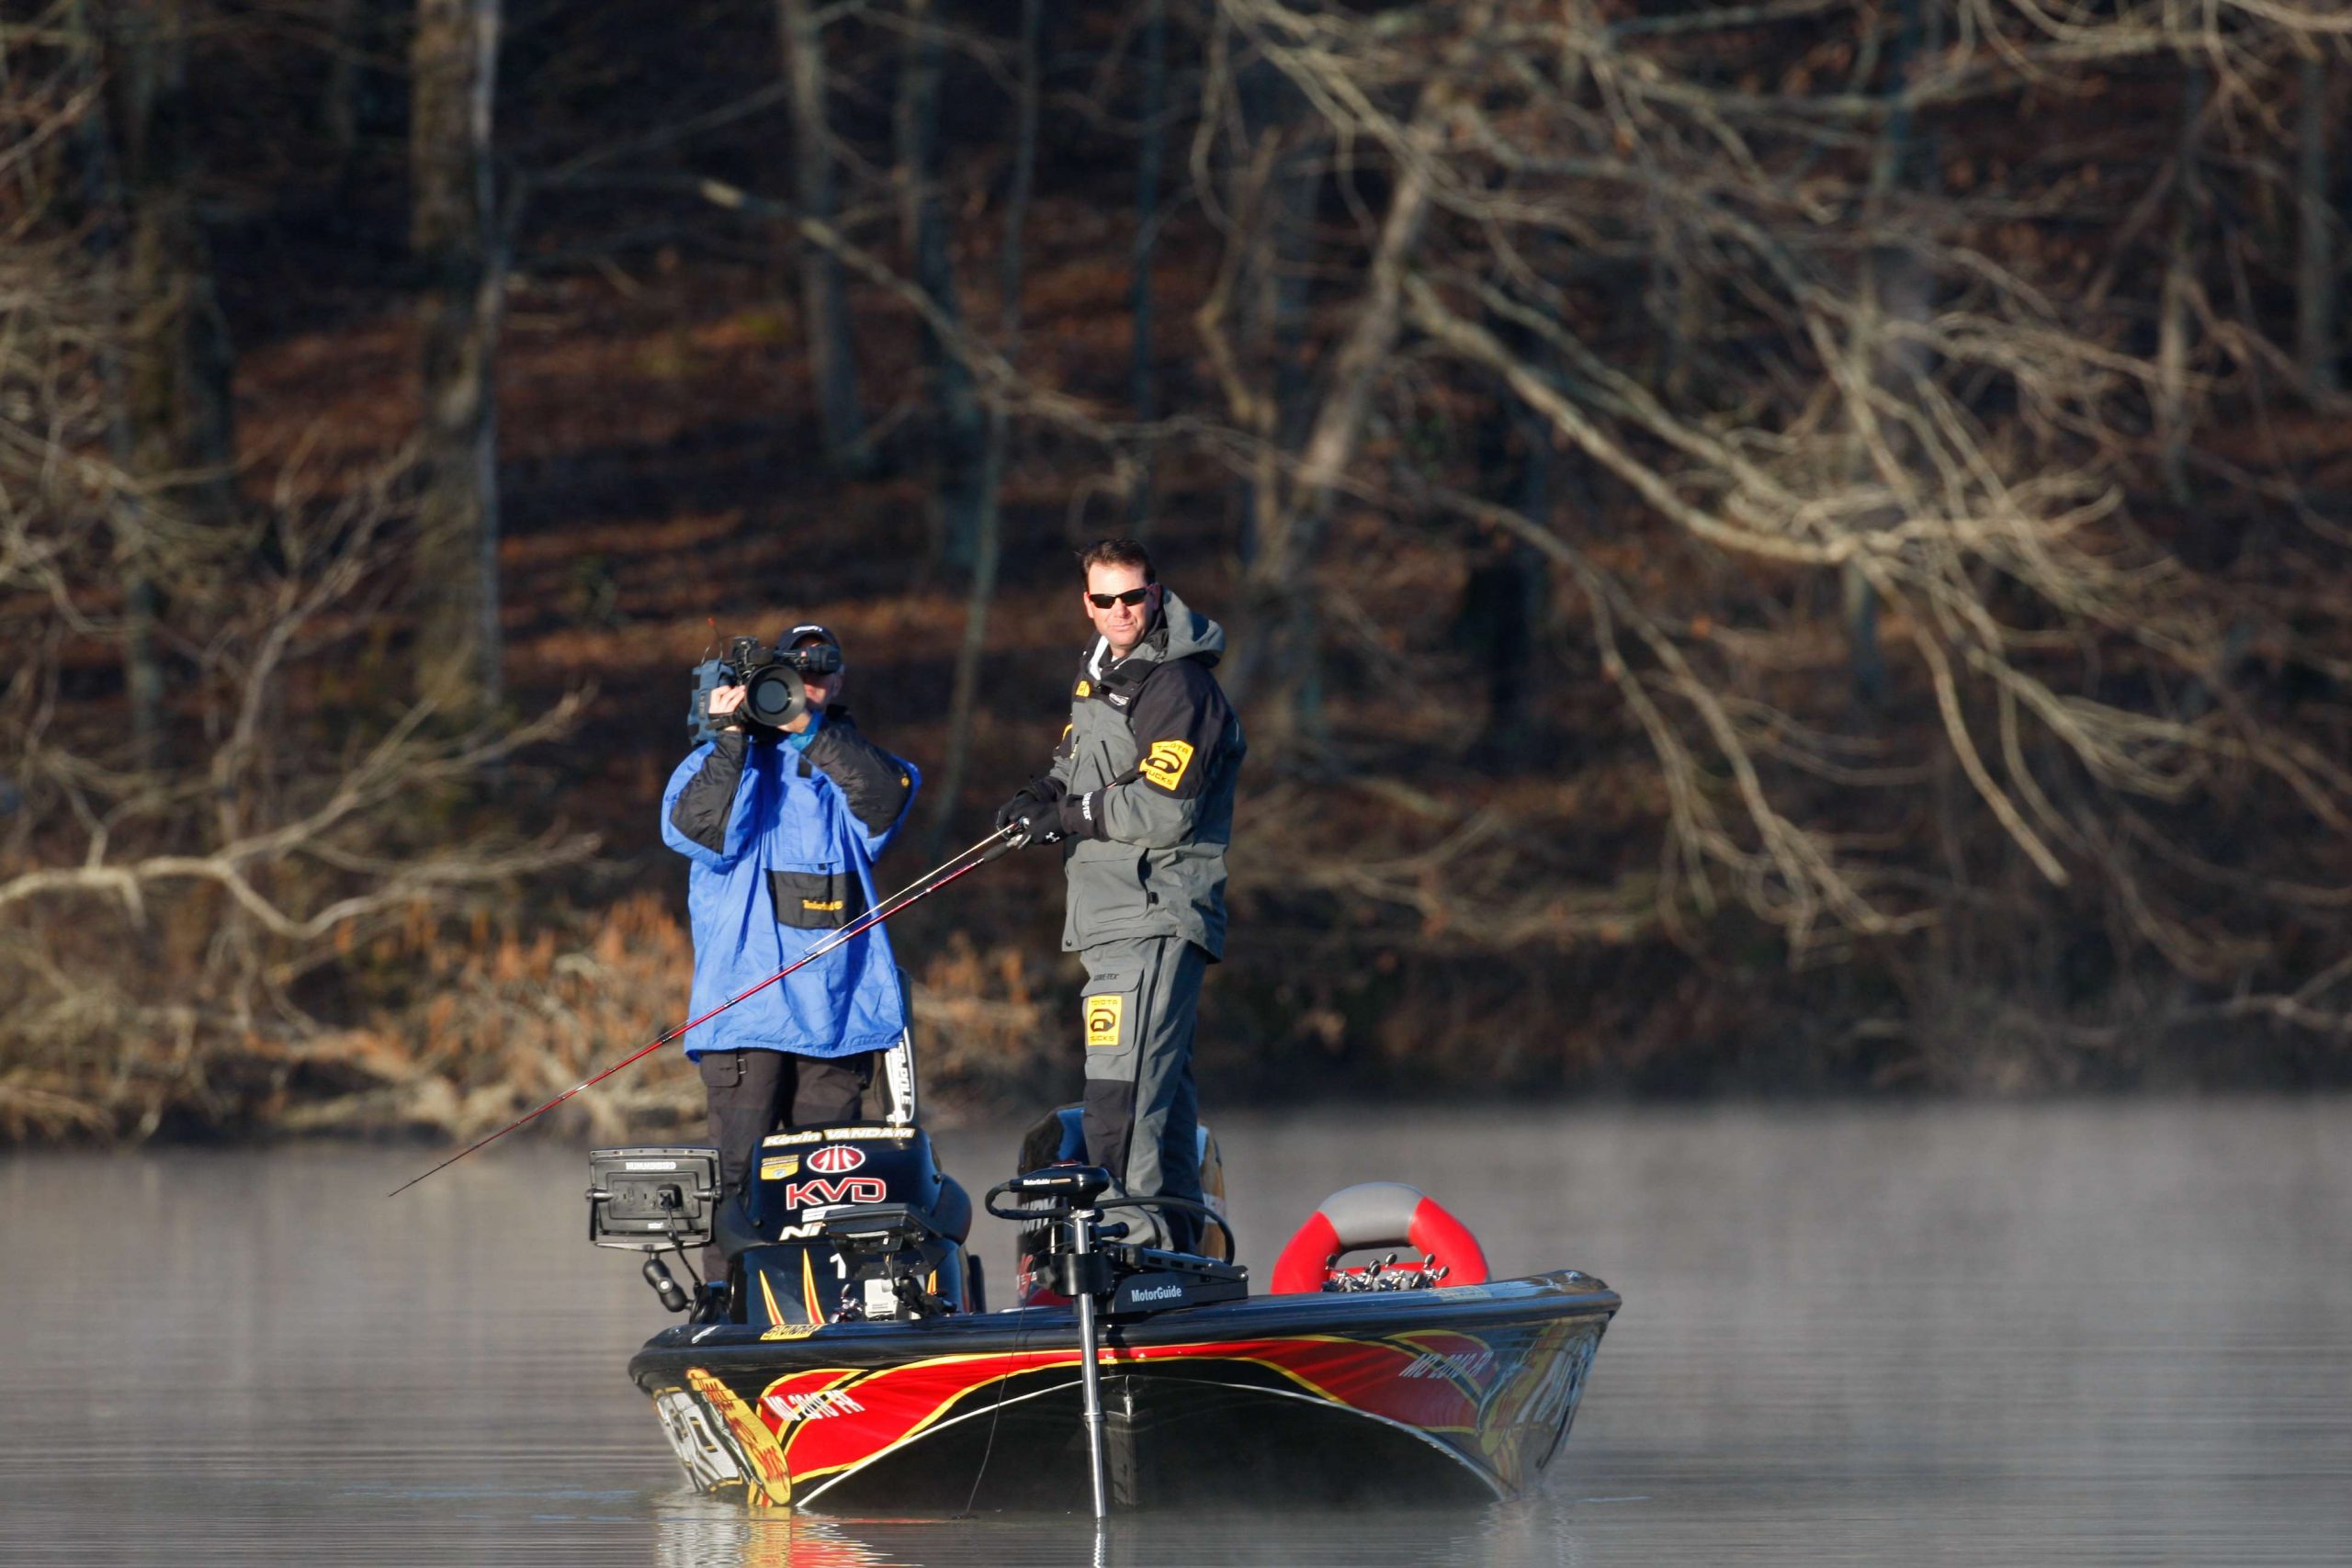 Kevin VanDam won the 40th Bassmaster Classic, on Lay Lake in 2010. 
